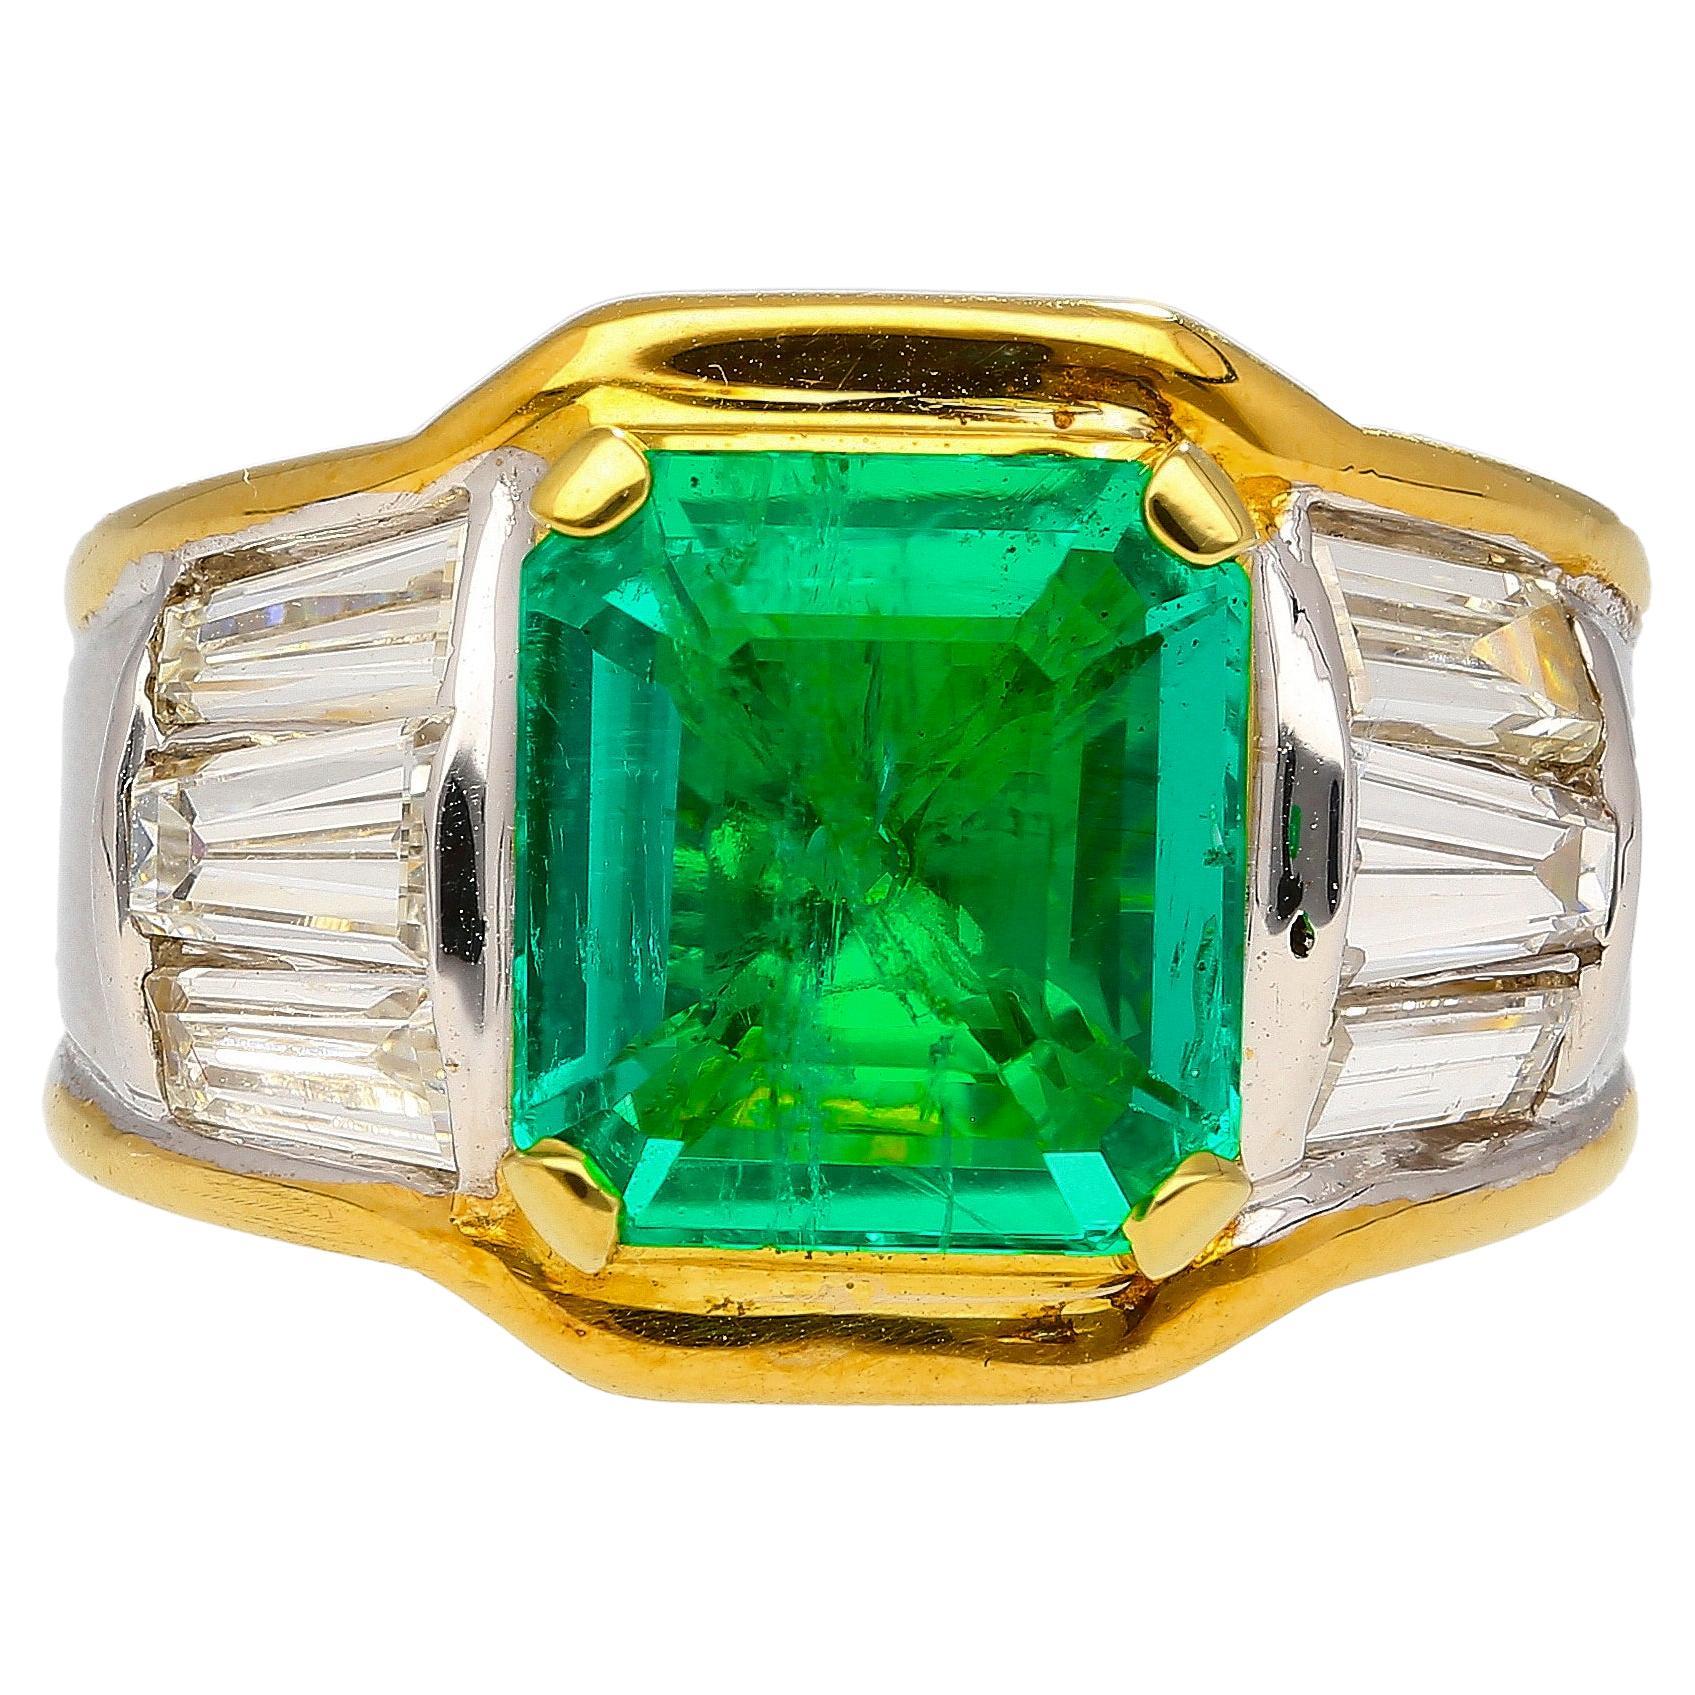 3.16 Carat Colombian Emerald Insignificant Oil Unisex Ring in Platinum & 18K  For Sale